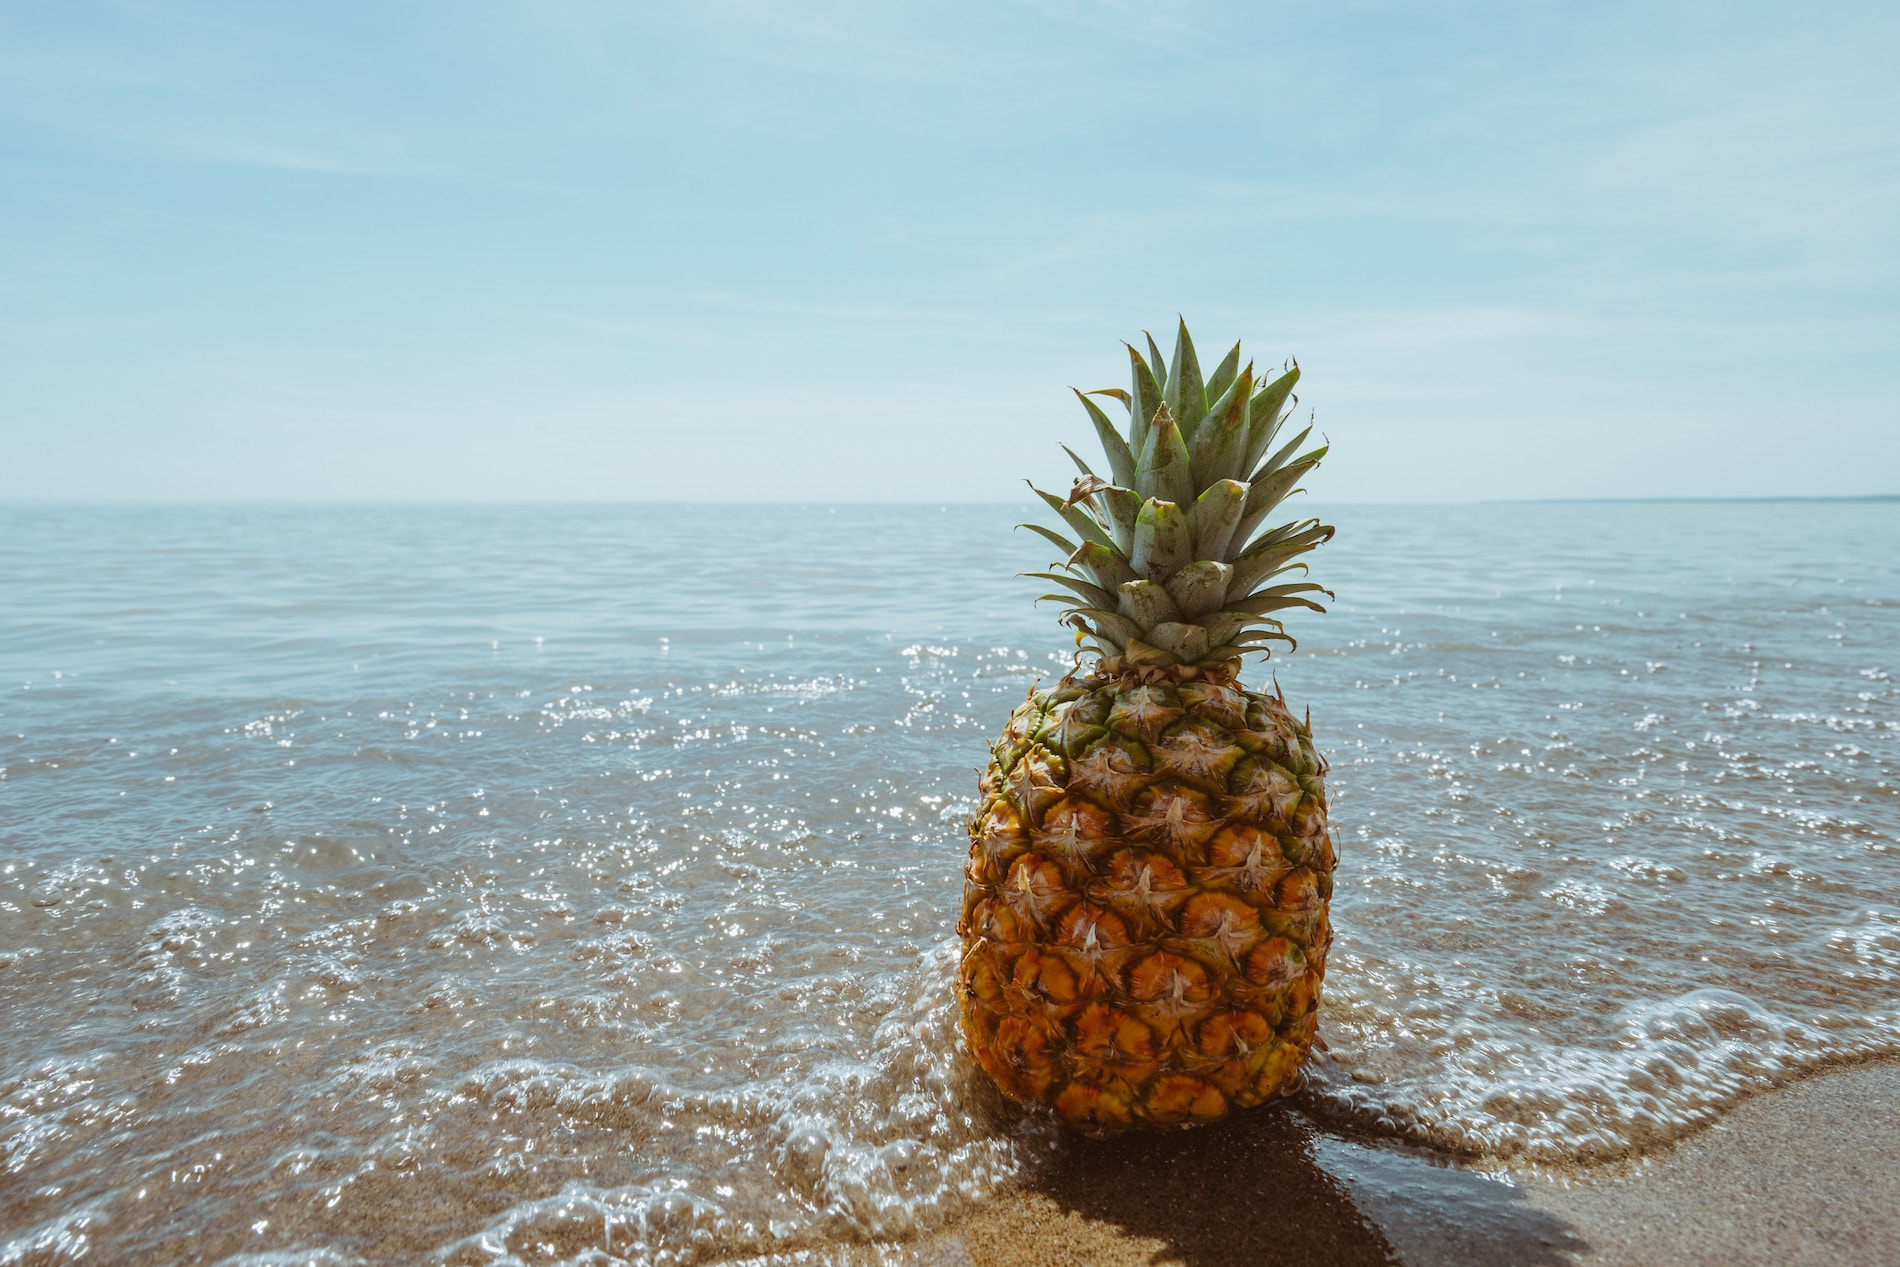 Photo by Pineapple Supply Co. on Unsplash